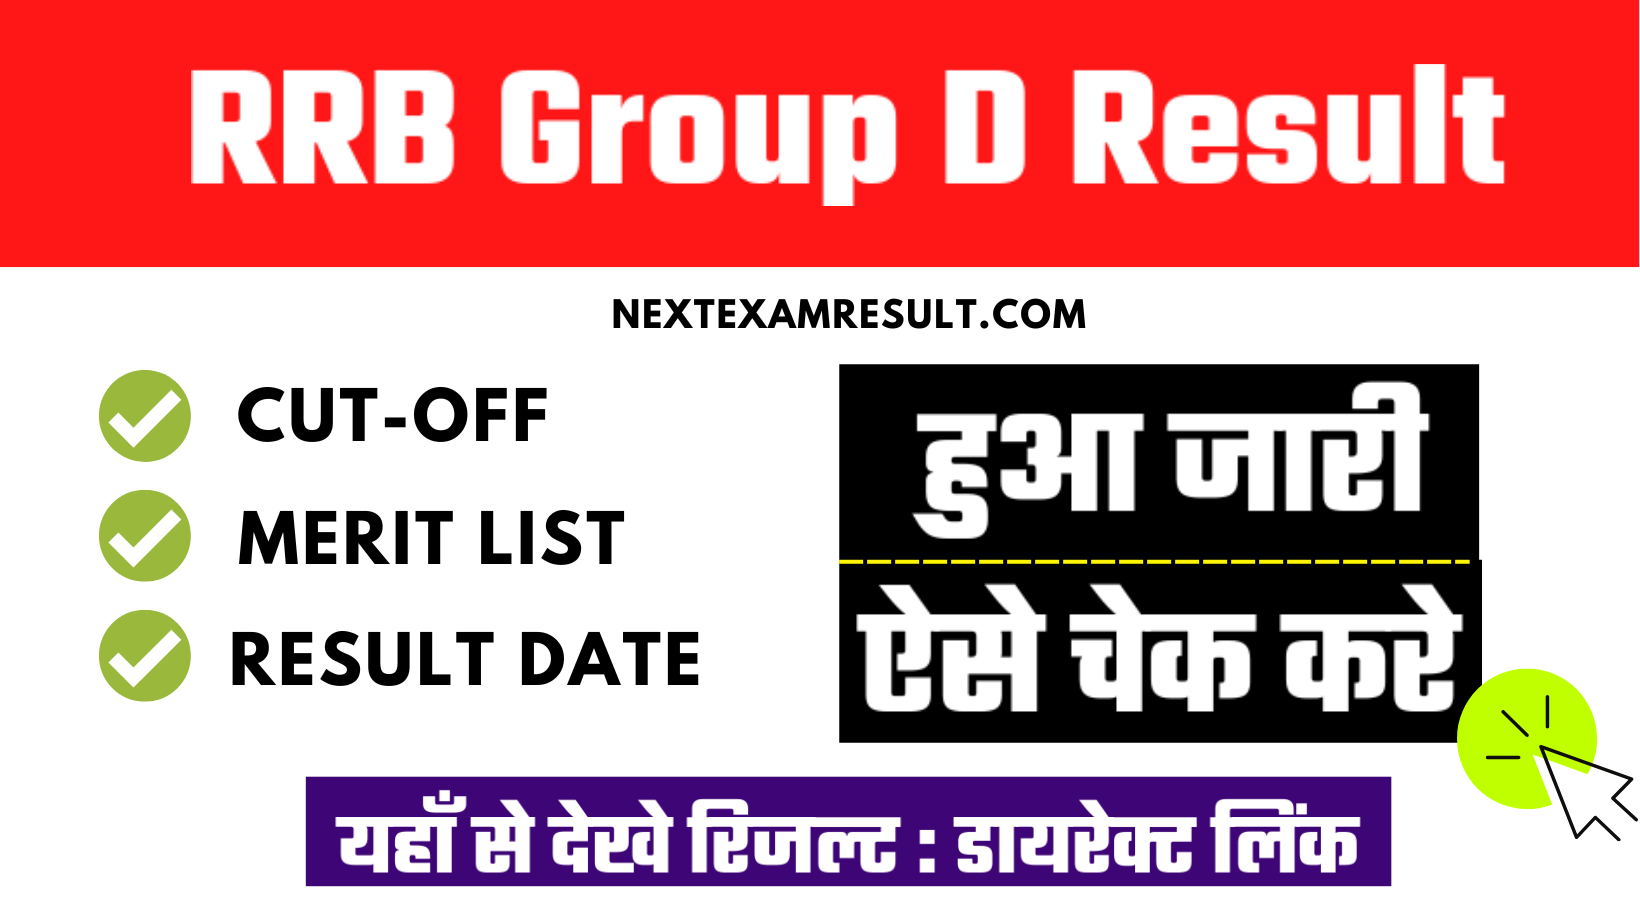 RRB Group D Result Kab Aayega